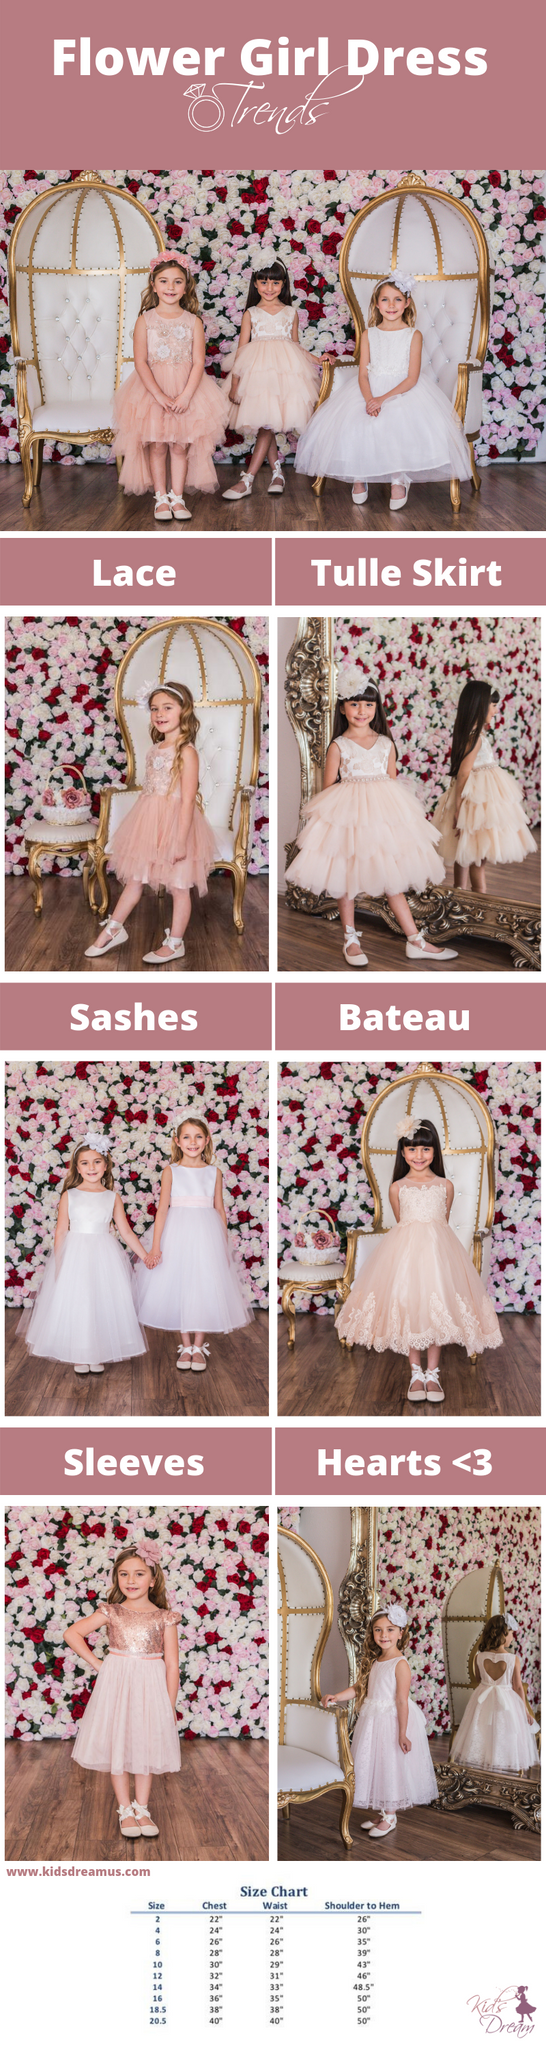 flower girl dress trends and size chart infographic  | kid's dream